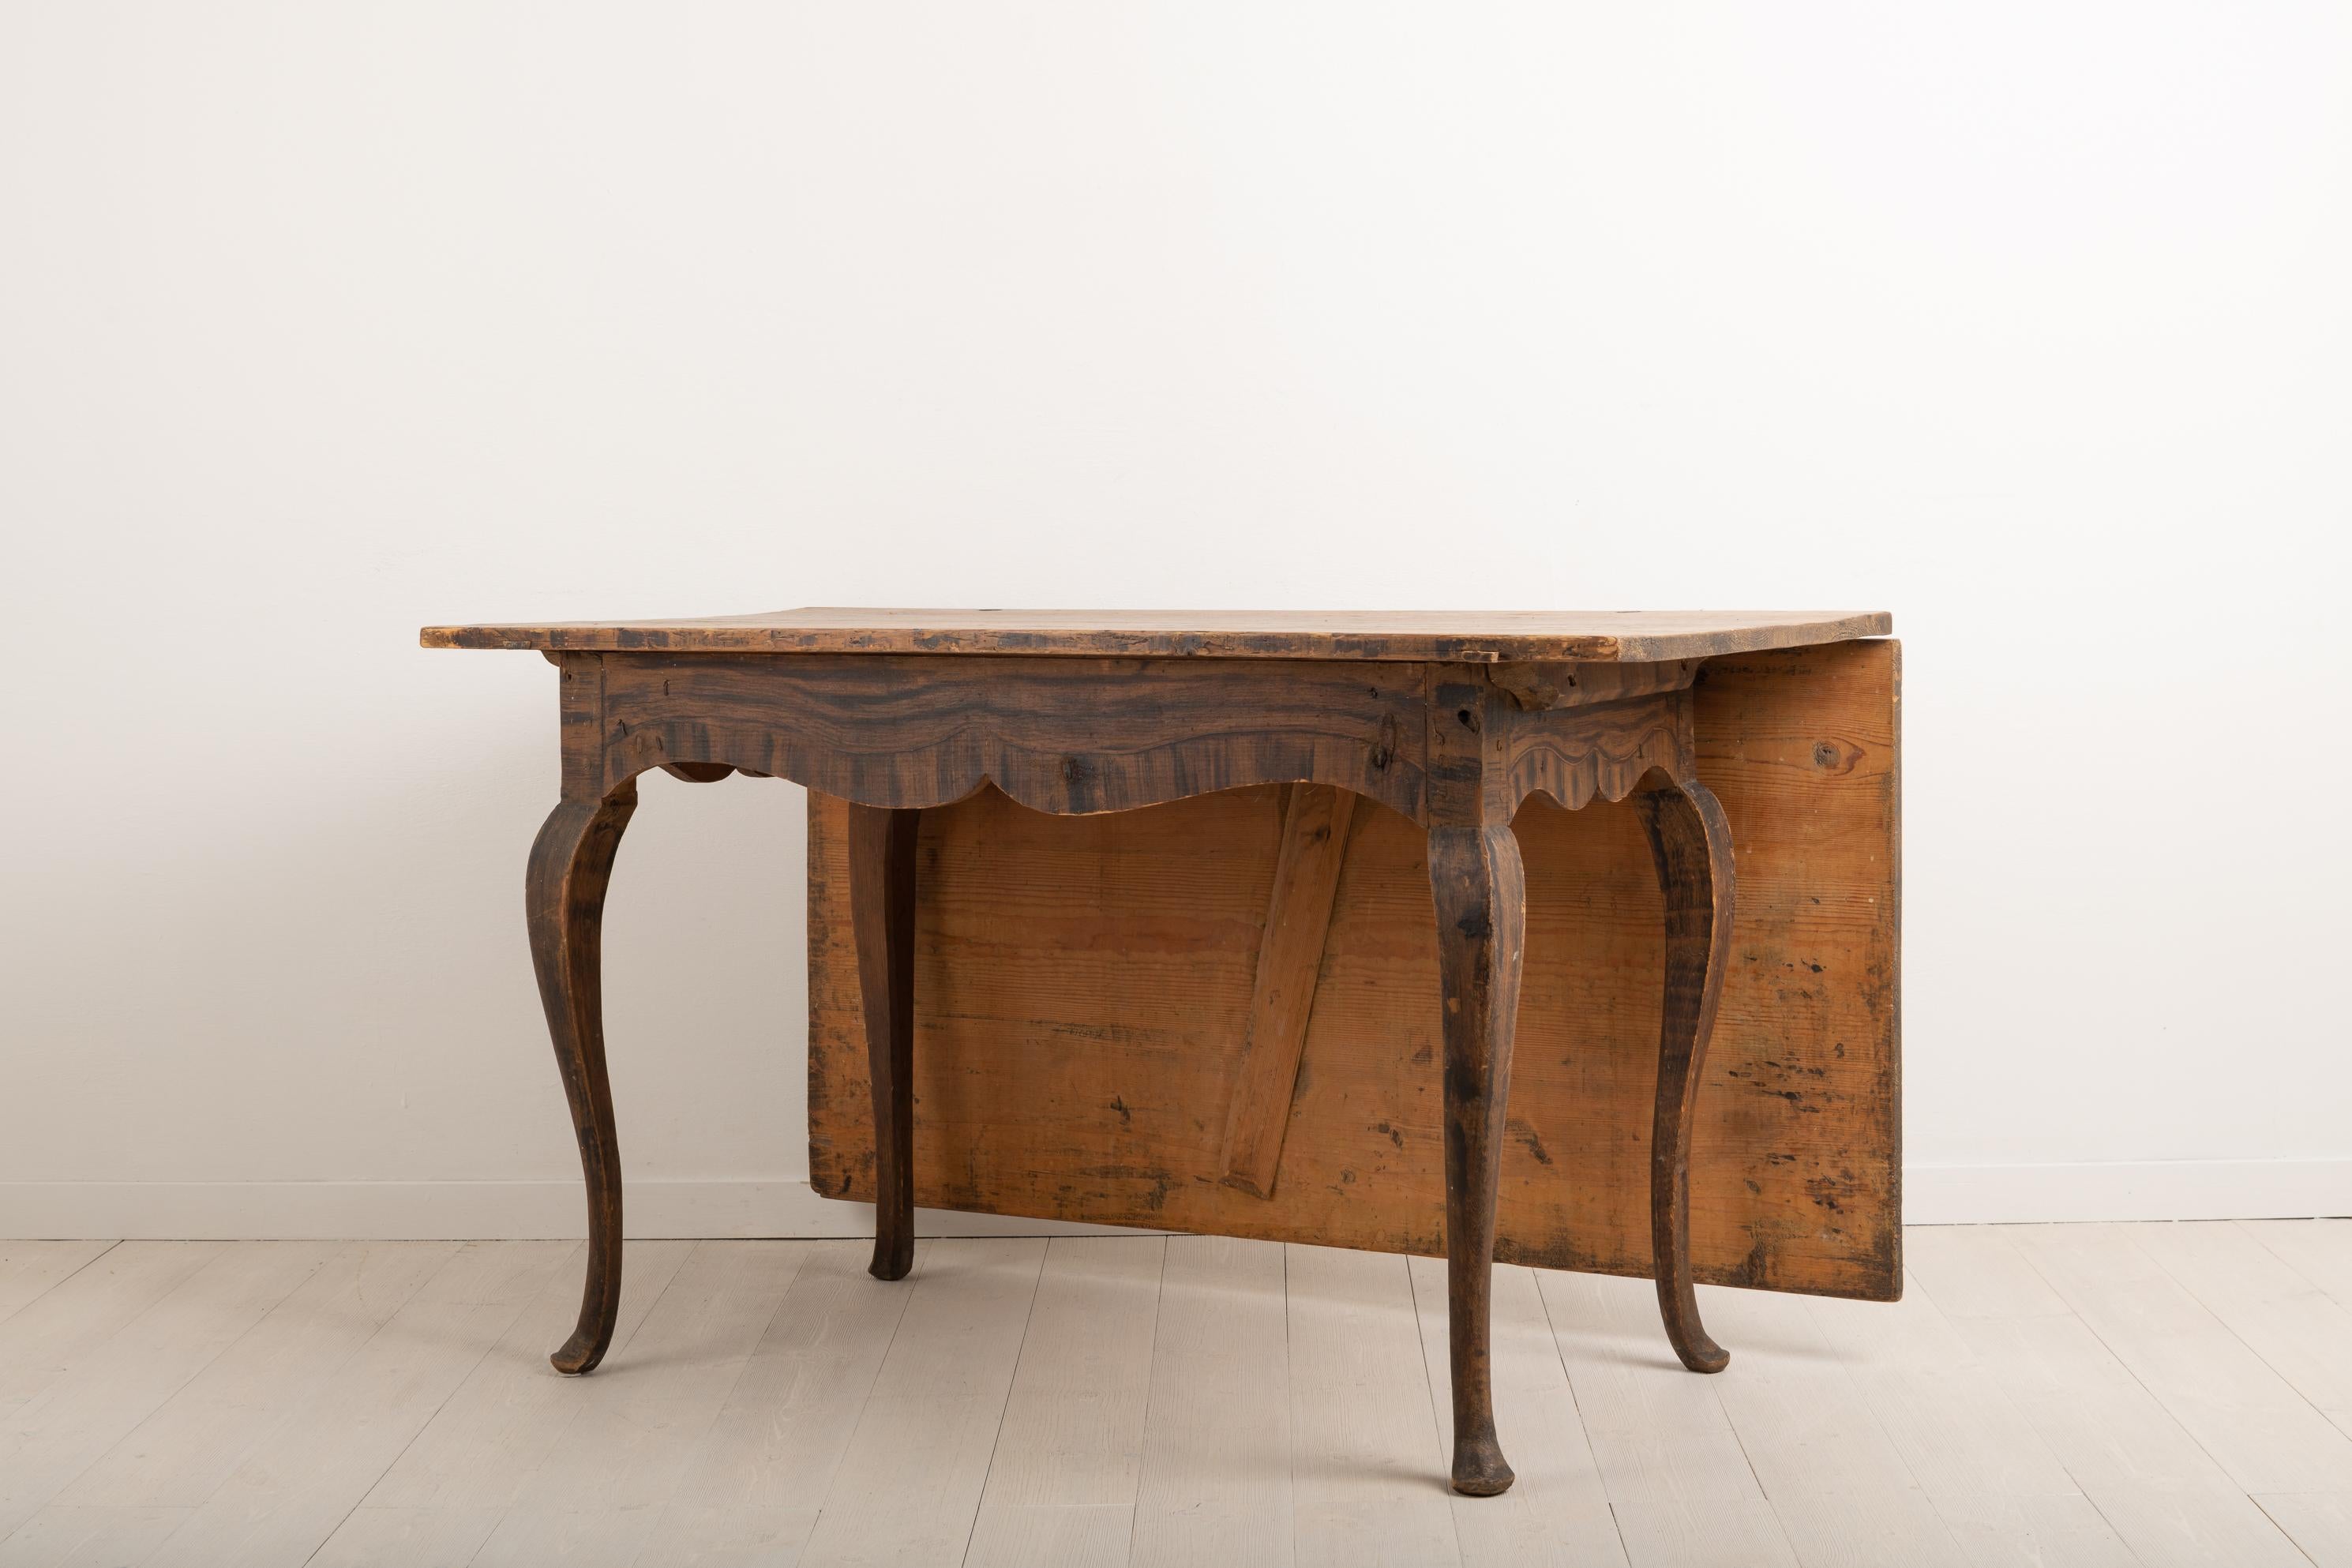 Mid-18th Century Swedish Baroque Drop-Leaf Table In Good Condition For Sale In Kramfors, SE